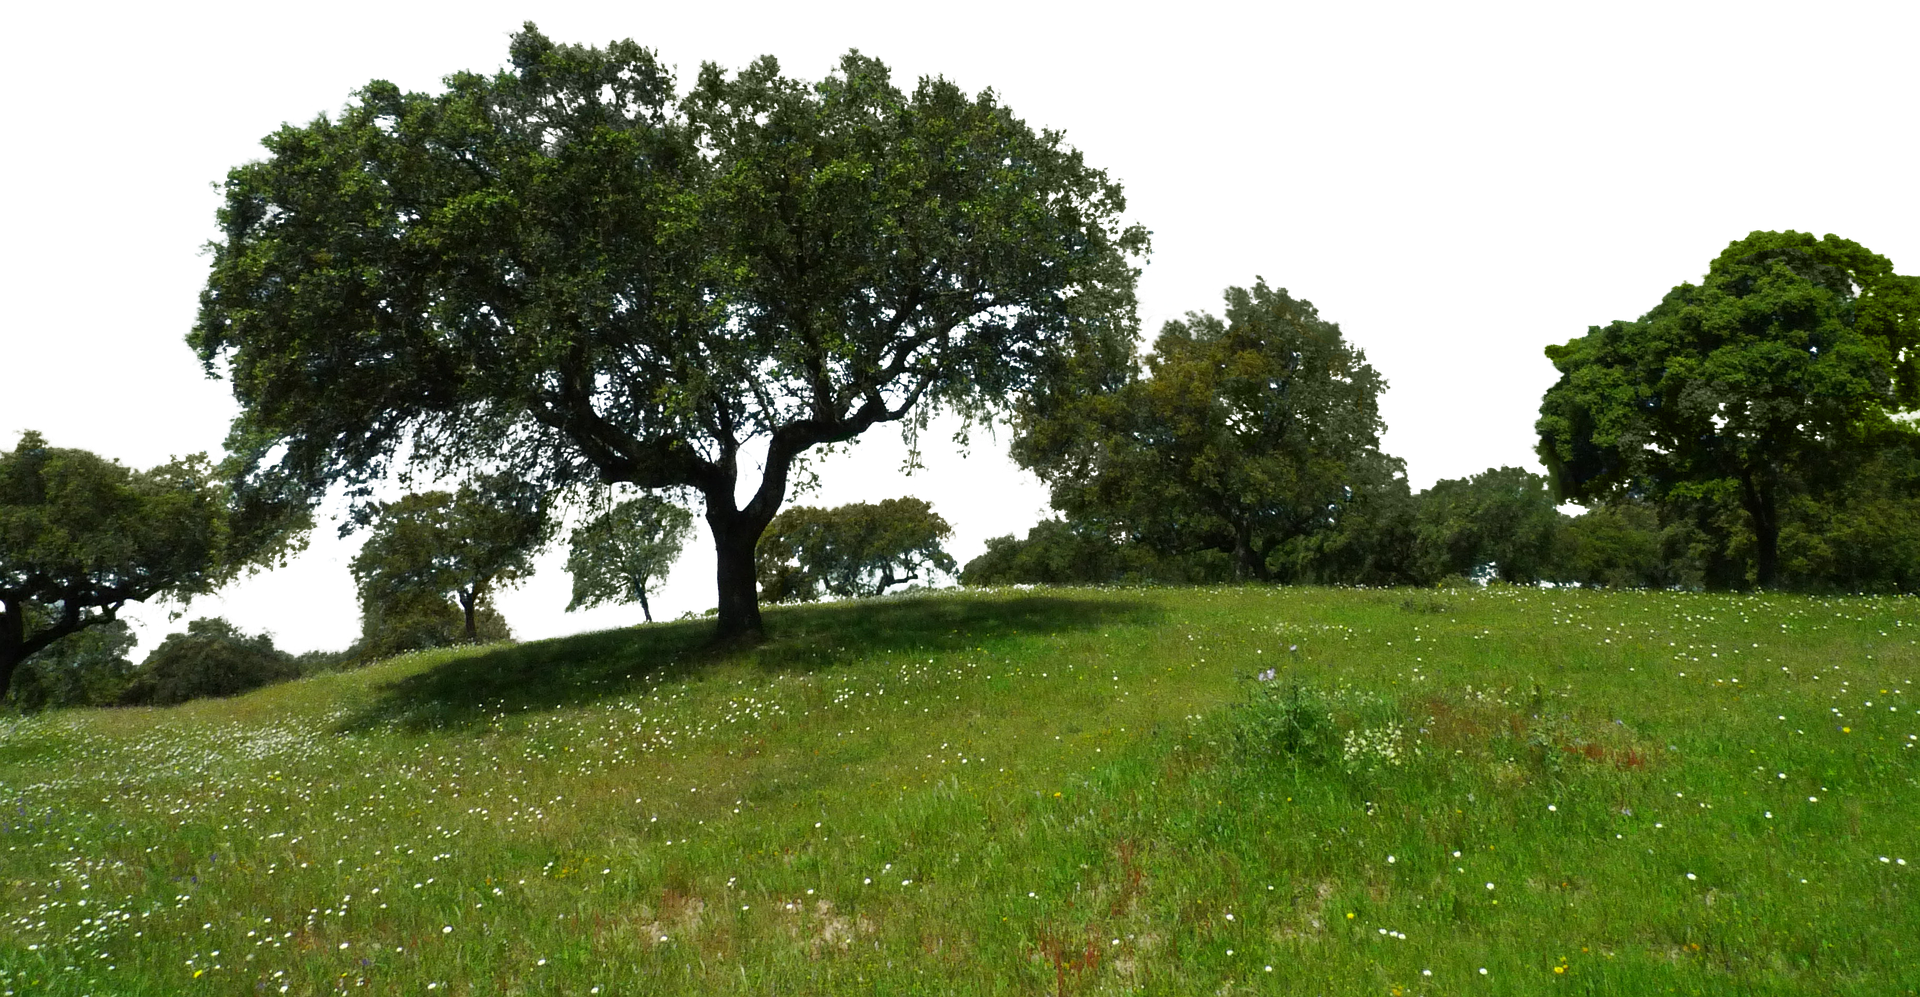 A Green Grass Field With Trees